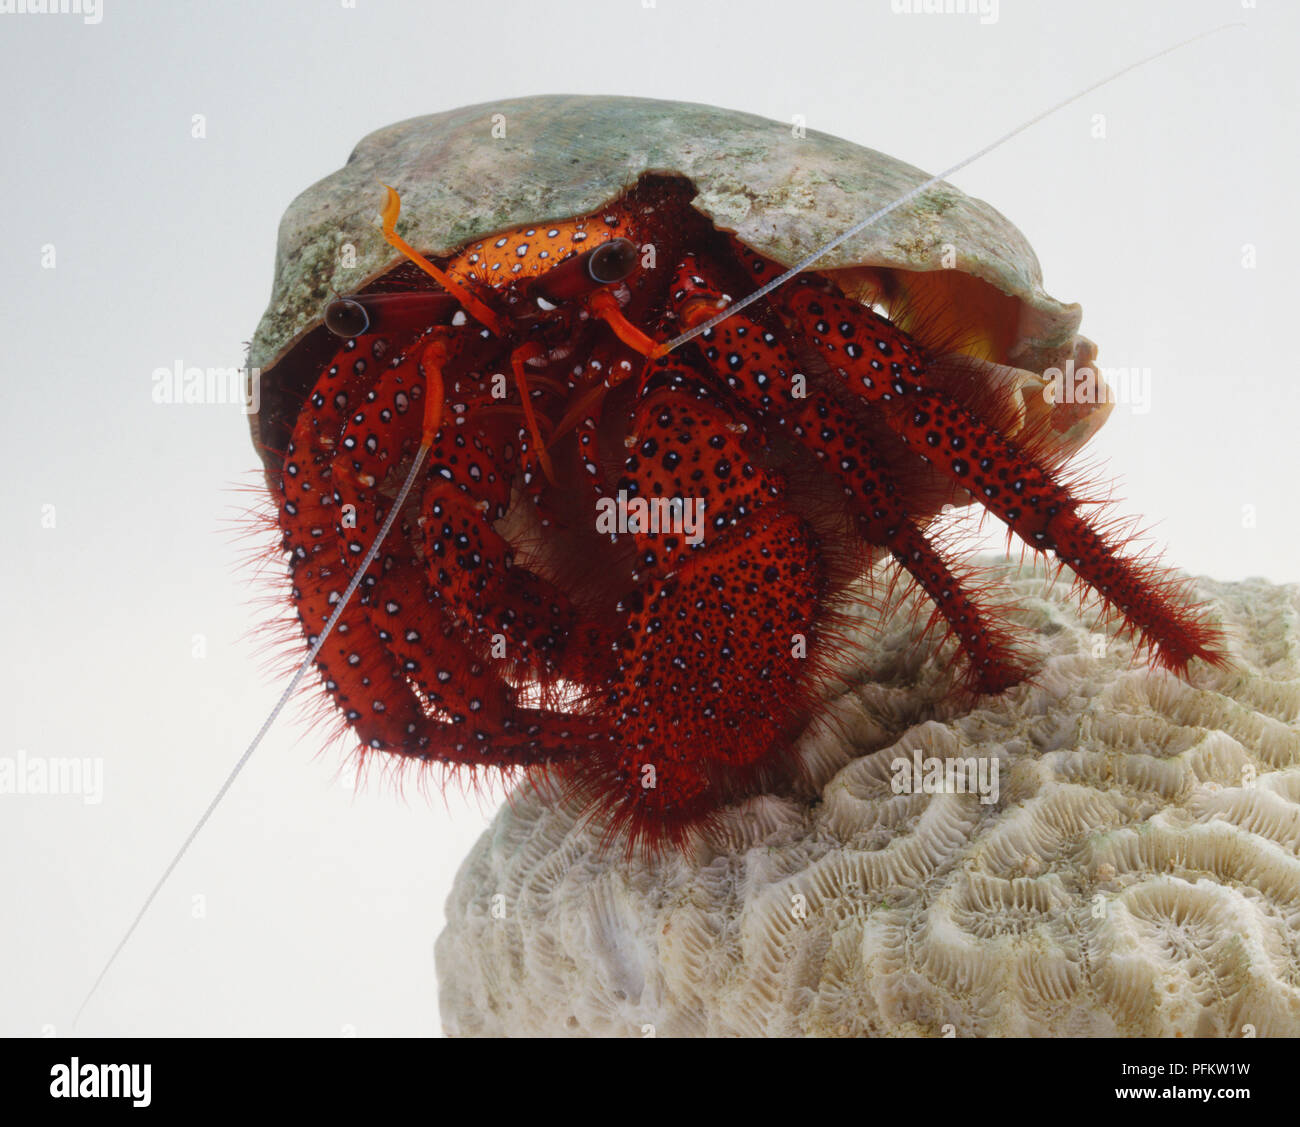 Dardanus megistos, Hermit Crab, red with bright black and white dots for camouflage, large eyes on end of stalks, ten legs with two huge pincers, standing on coral, front view. Stock Photo